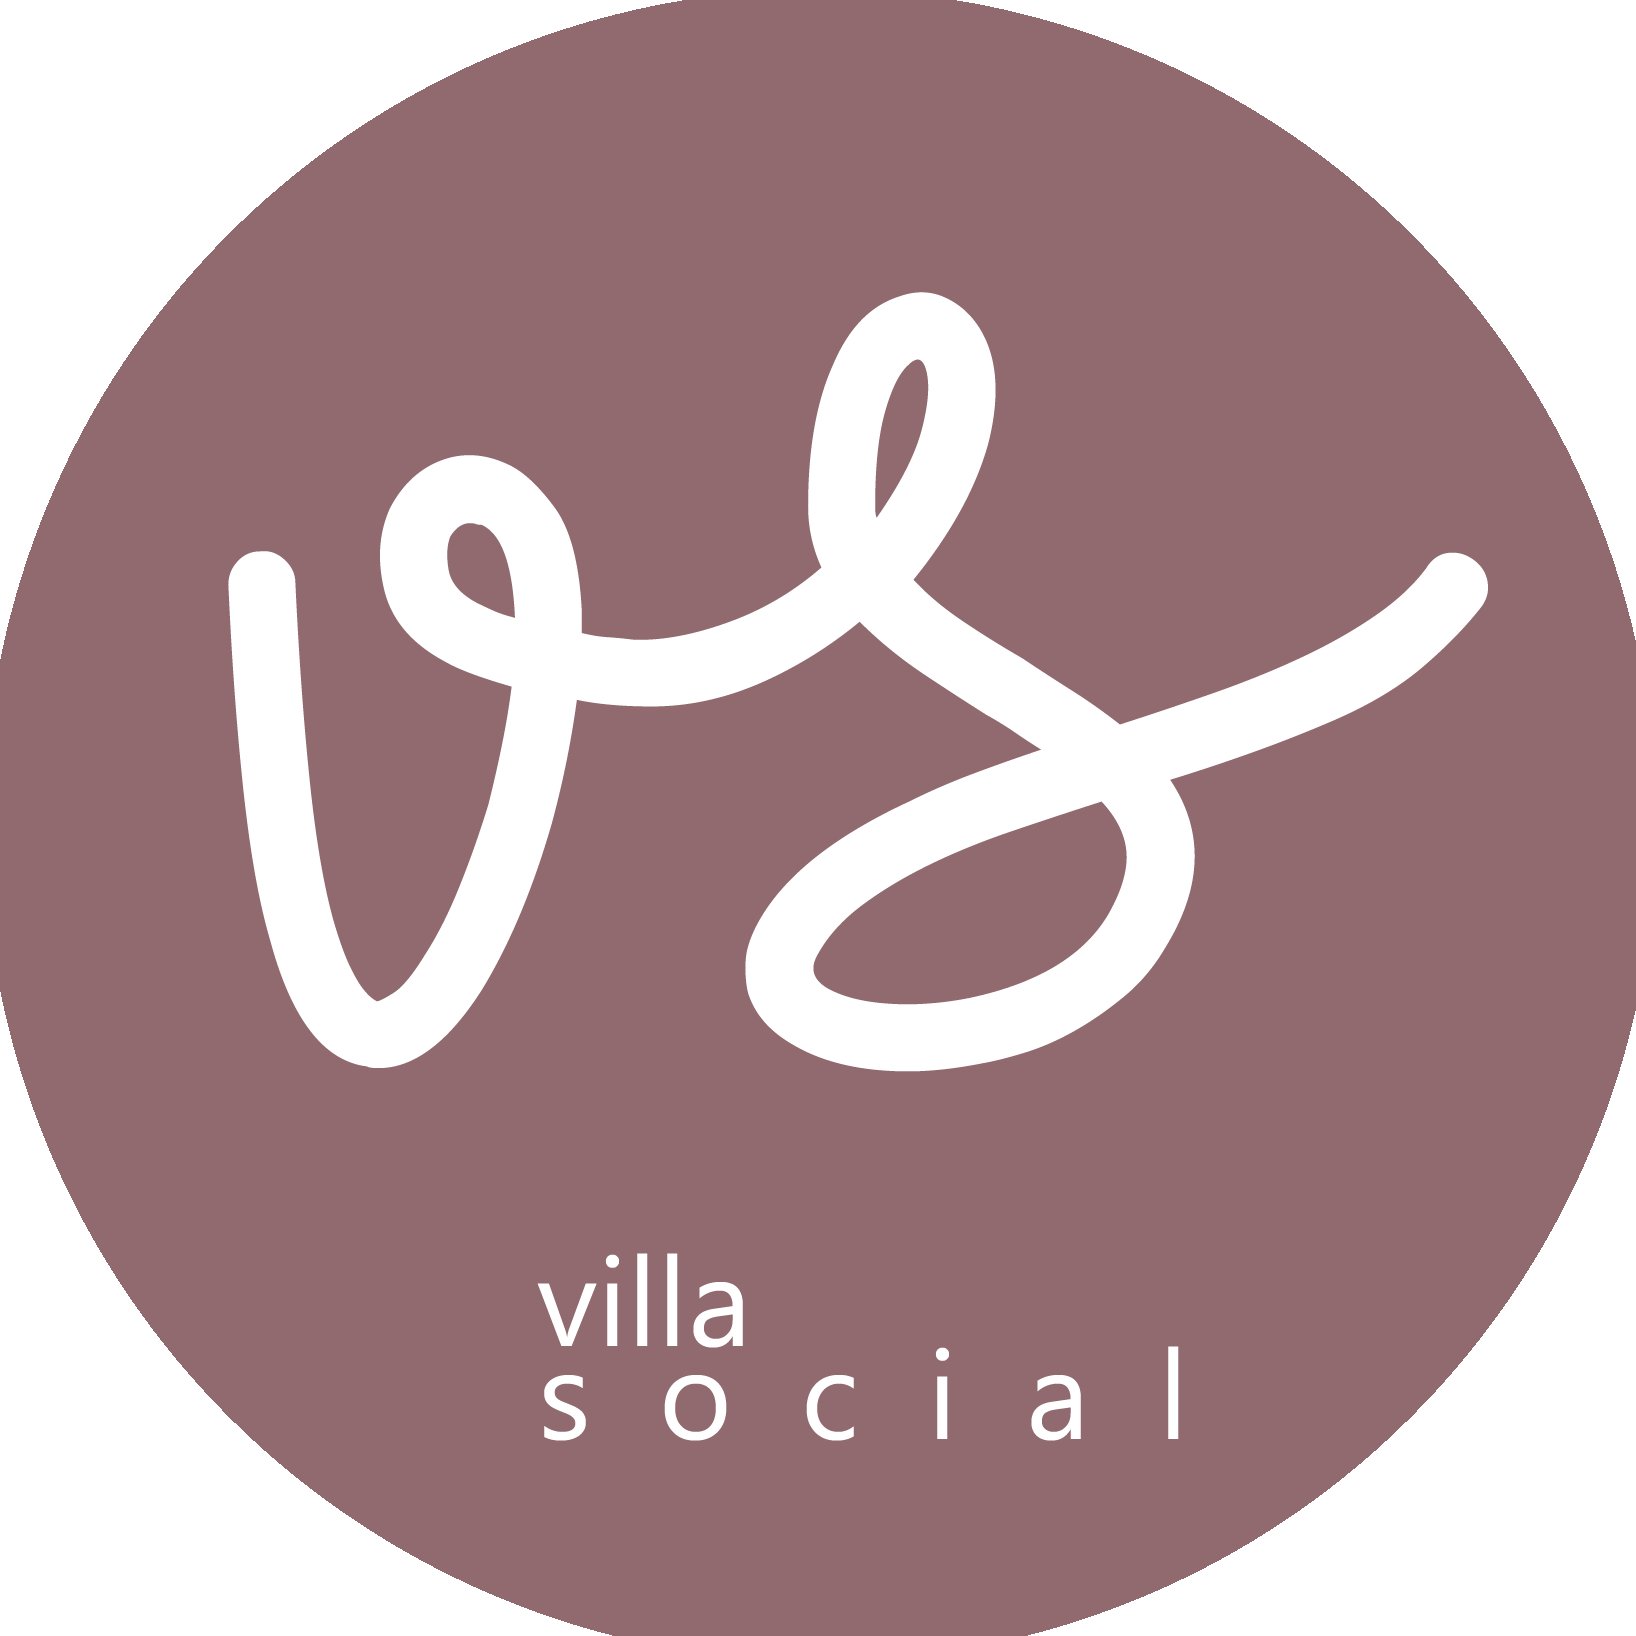 Villa Social media is everything Bali. We post everything we can to make you want to move there. Permanently